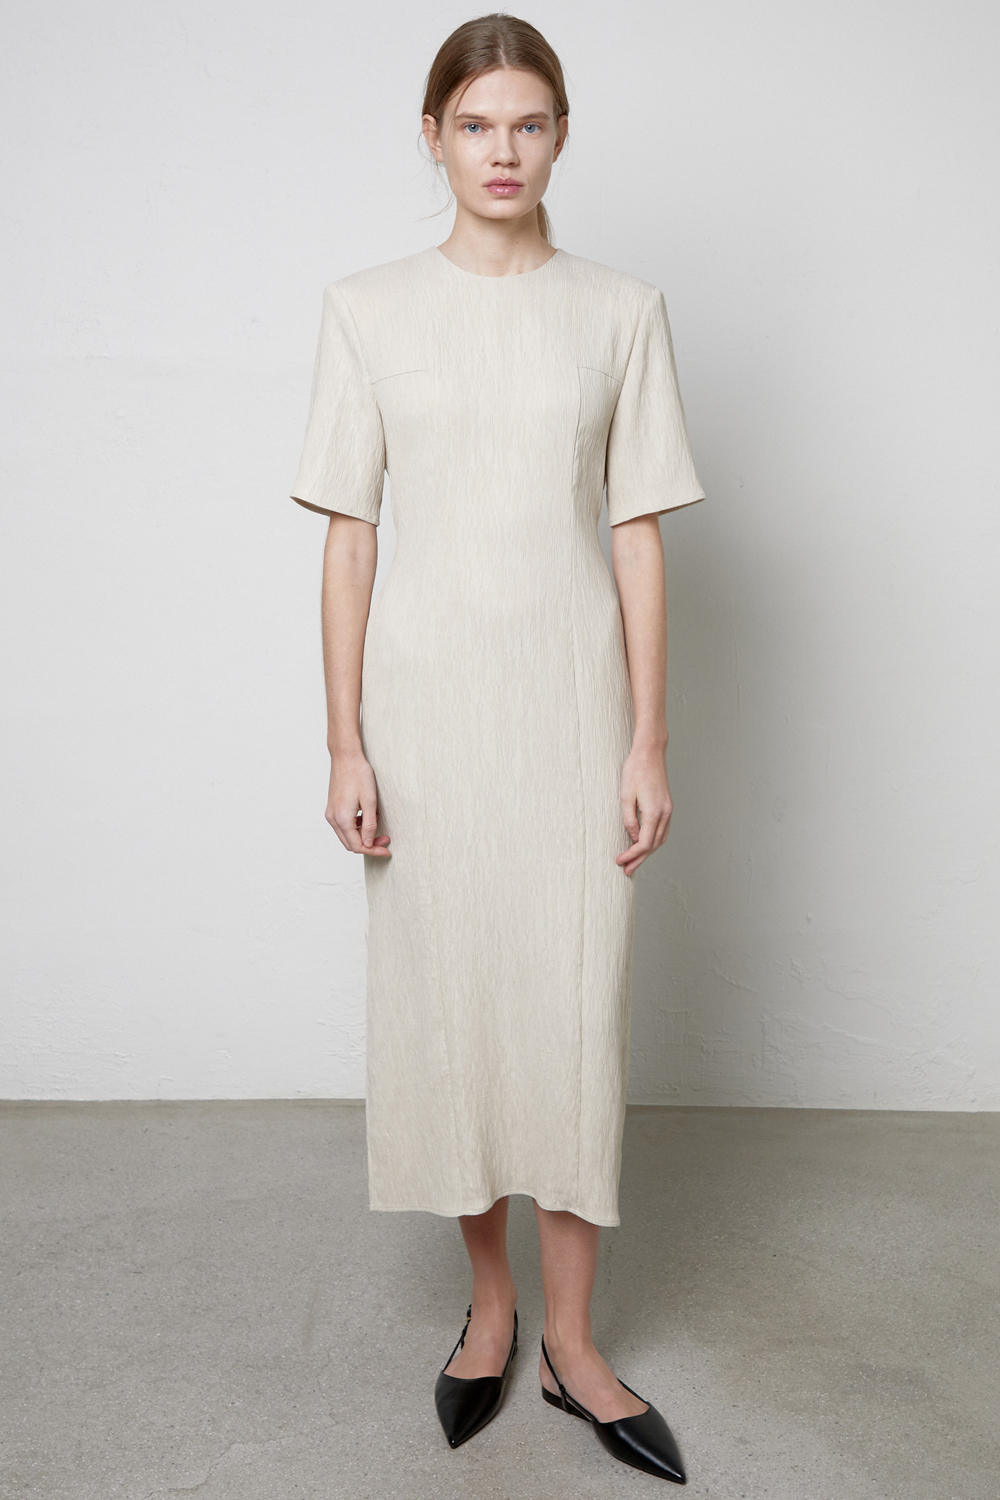 [2nd : 4/25, 3rd : 4/30, 4th : 5/8, 5th : 5/13, 6th : 5/17 pre-order delivery] Pleats Midi Dress_Beige